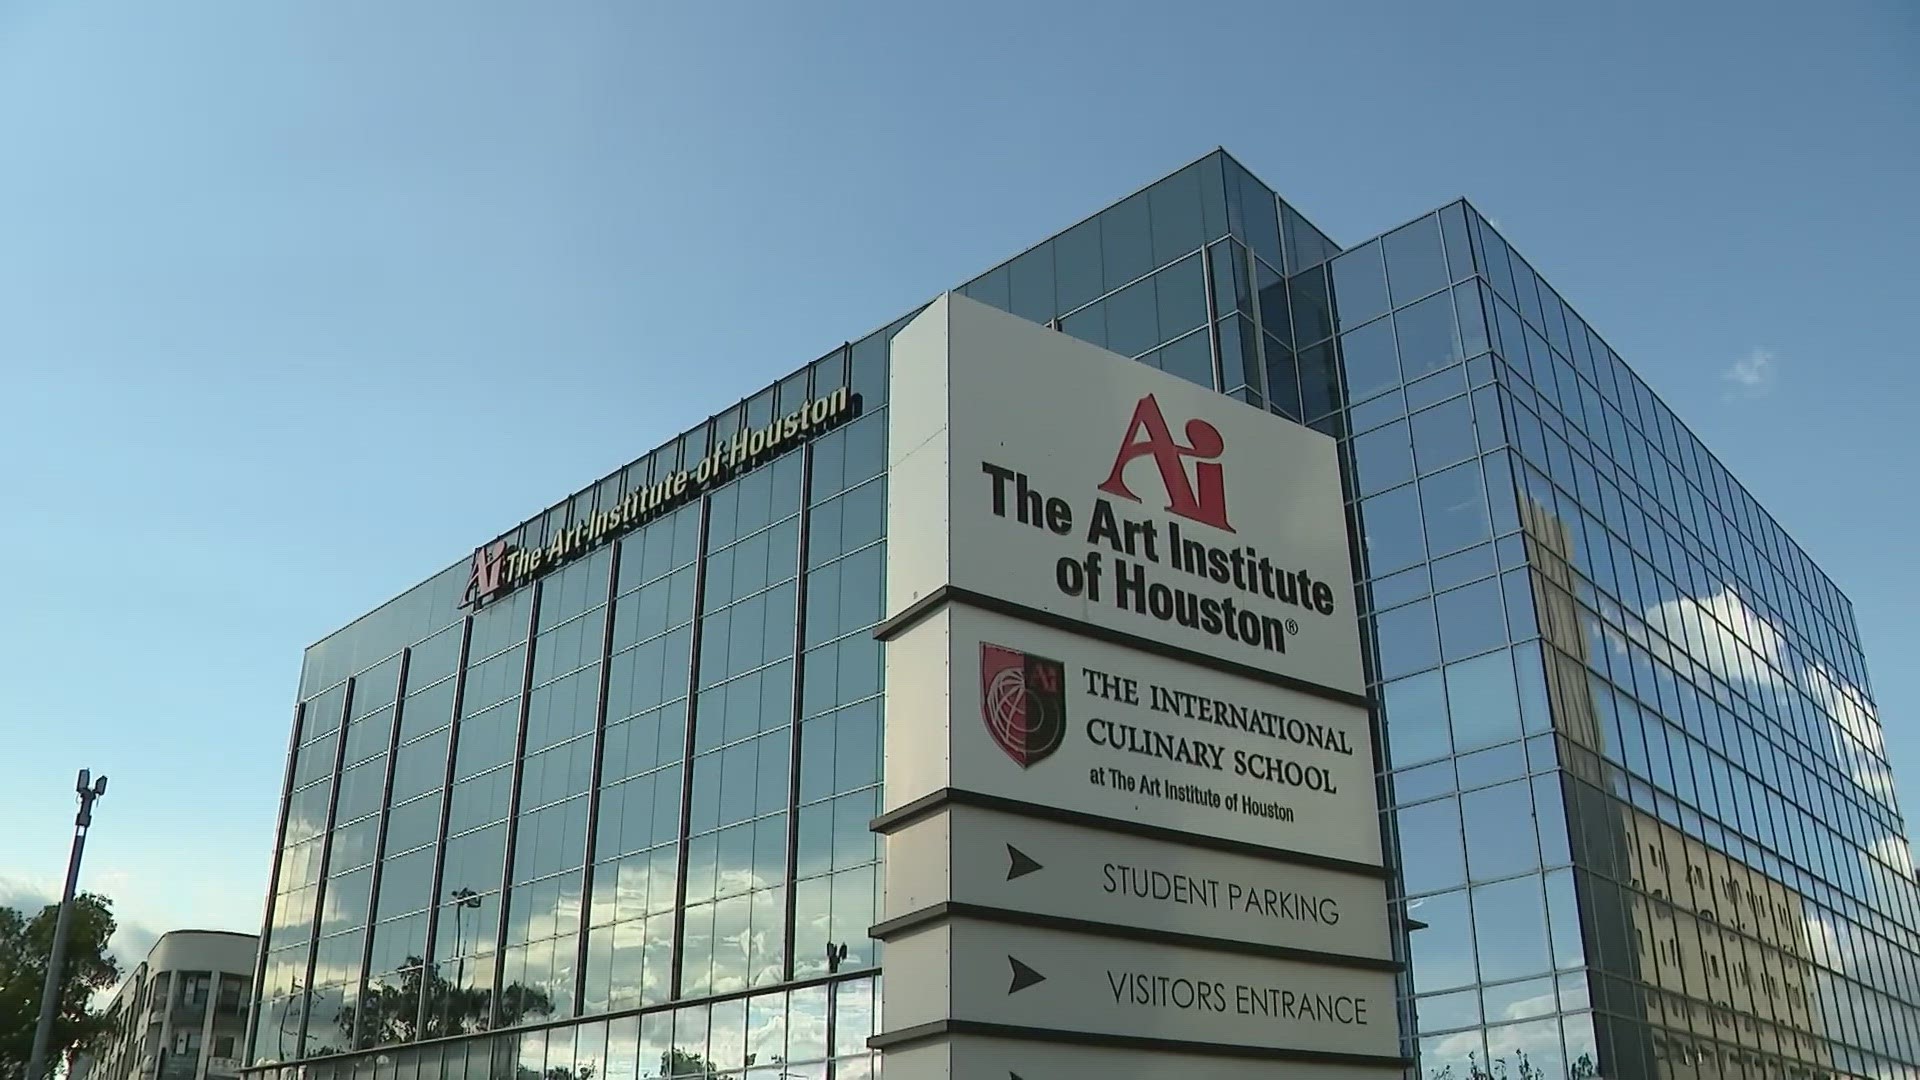 The Art Institute of Houston, as well as Art Institute campuses across the country shut down unexpectedly.